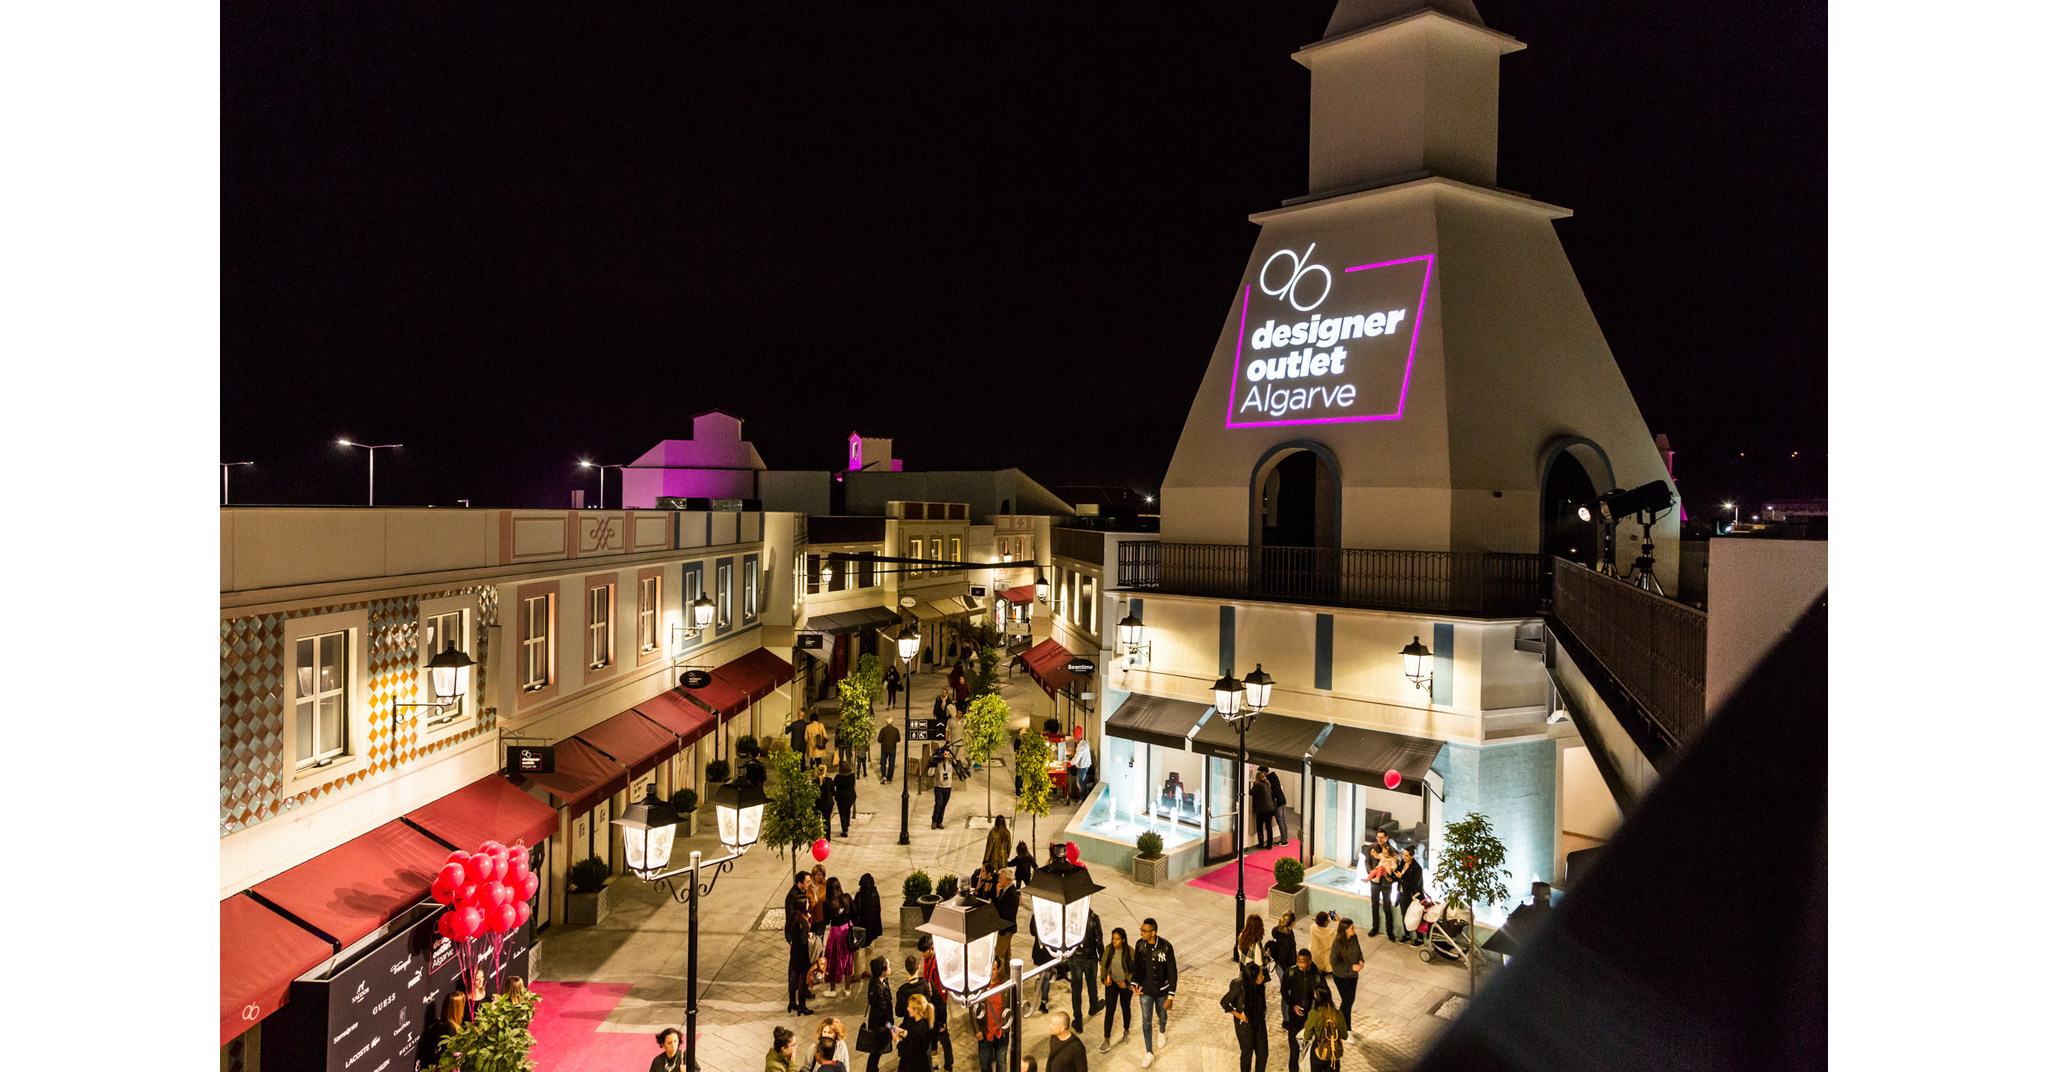 ROS Retail Outlet Shopping Celebrated the Grand of Designer Outlet Algarve